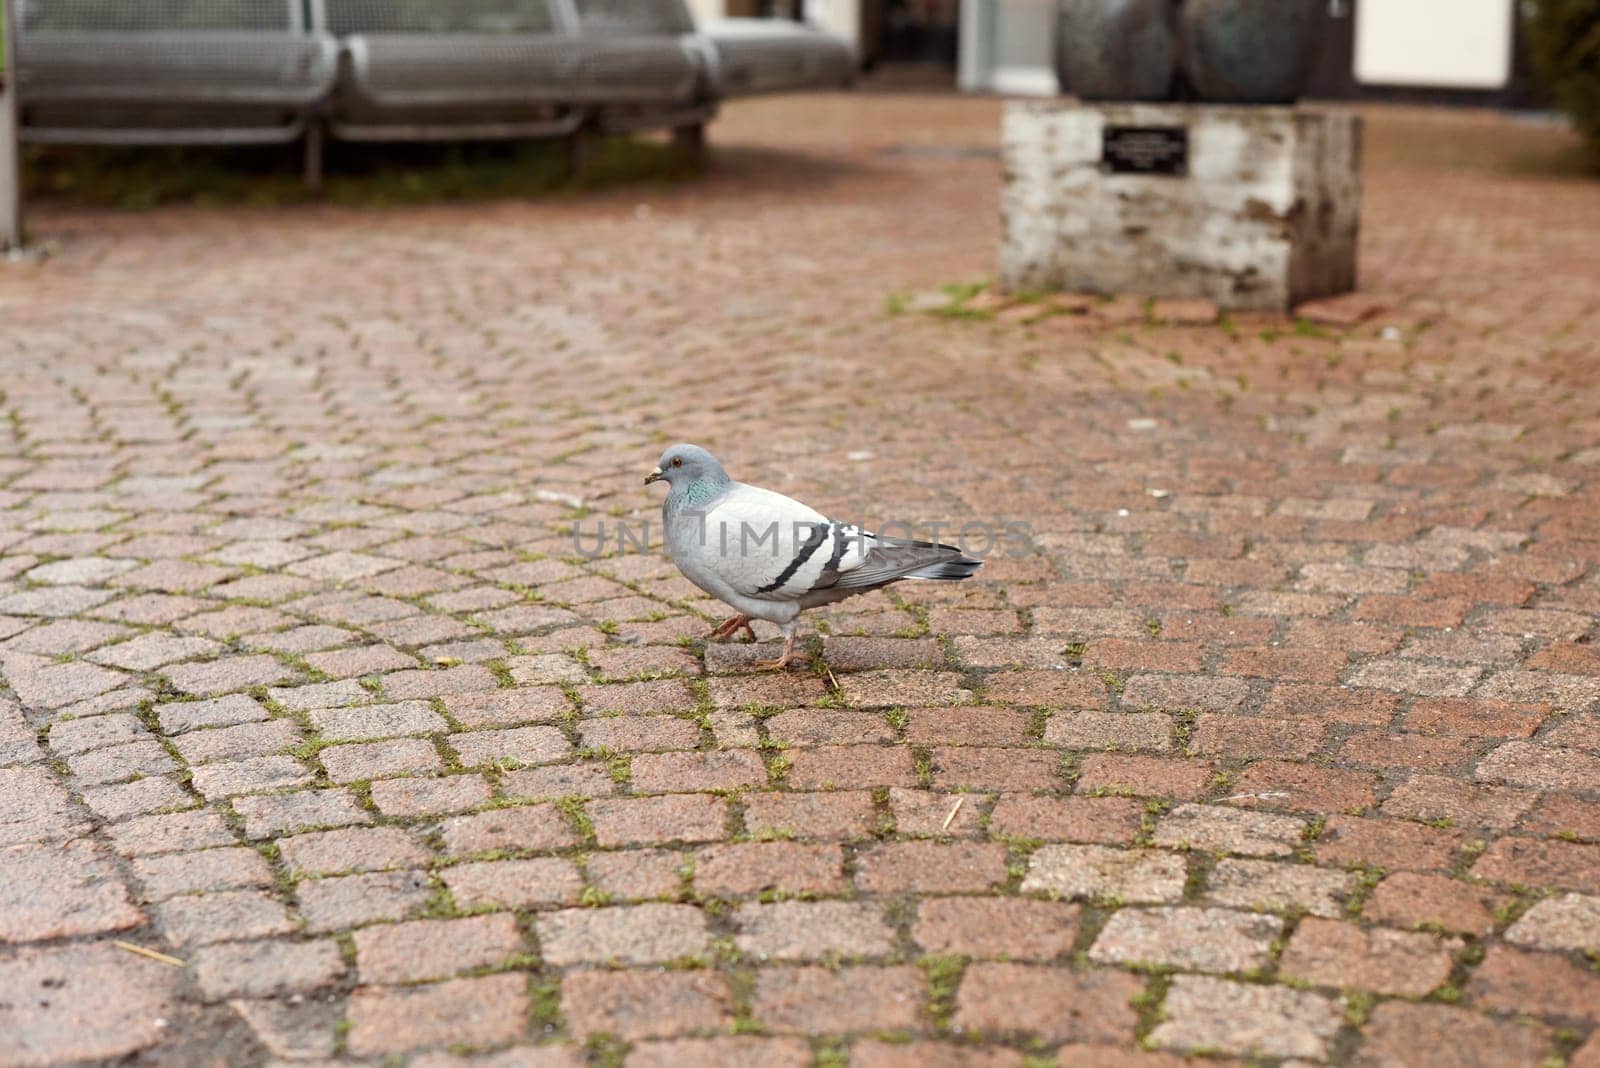 Urban Pigeon on Pavement Walkway. Urban Pigeon Walking Along the Road. Witness the simplicity of urban life with this image capturing a pigeon leisurely strolling along a tiled pavement walkway. The photograph beautifully showcases the graceful movement of the bird on the well-paved path, adding a touch of tranquility to the urban environment by Andrii_Ko